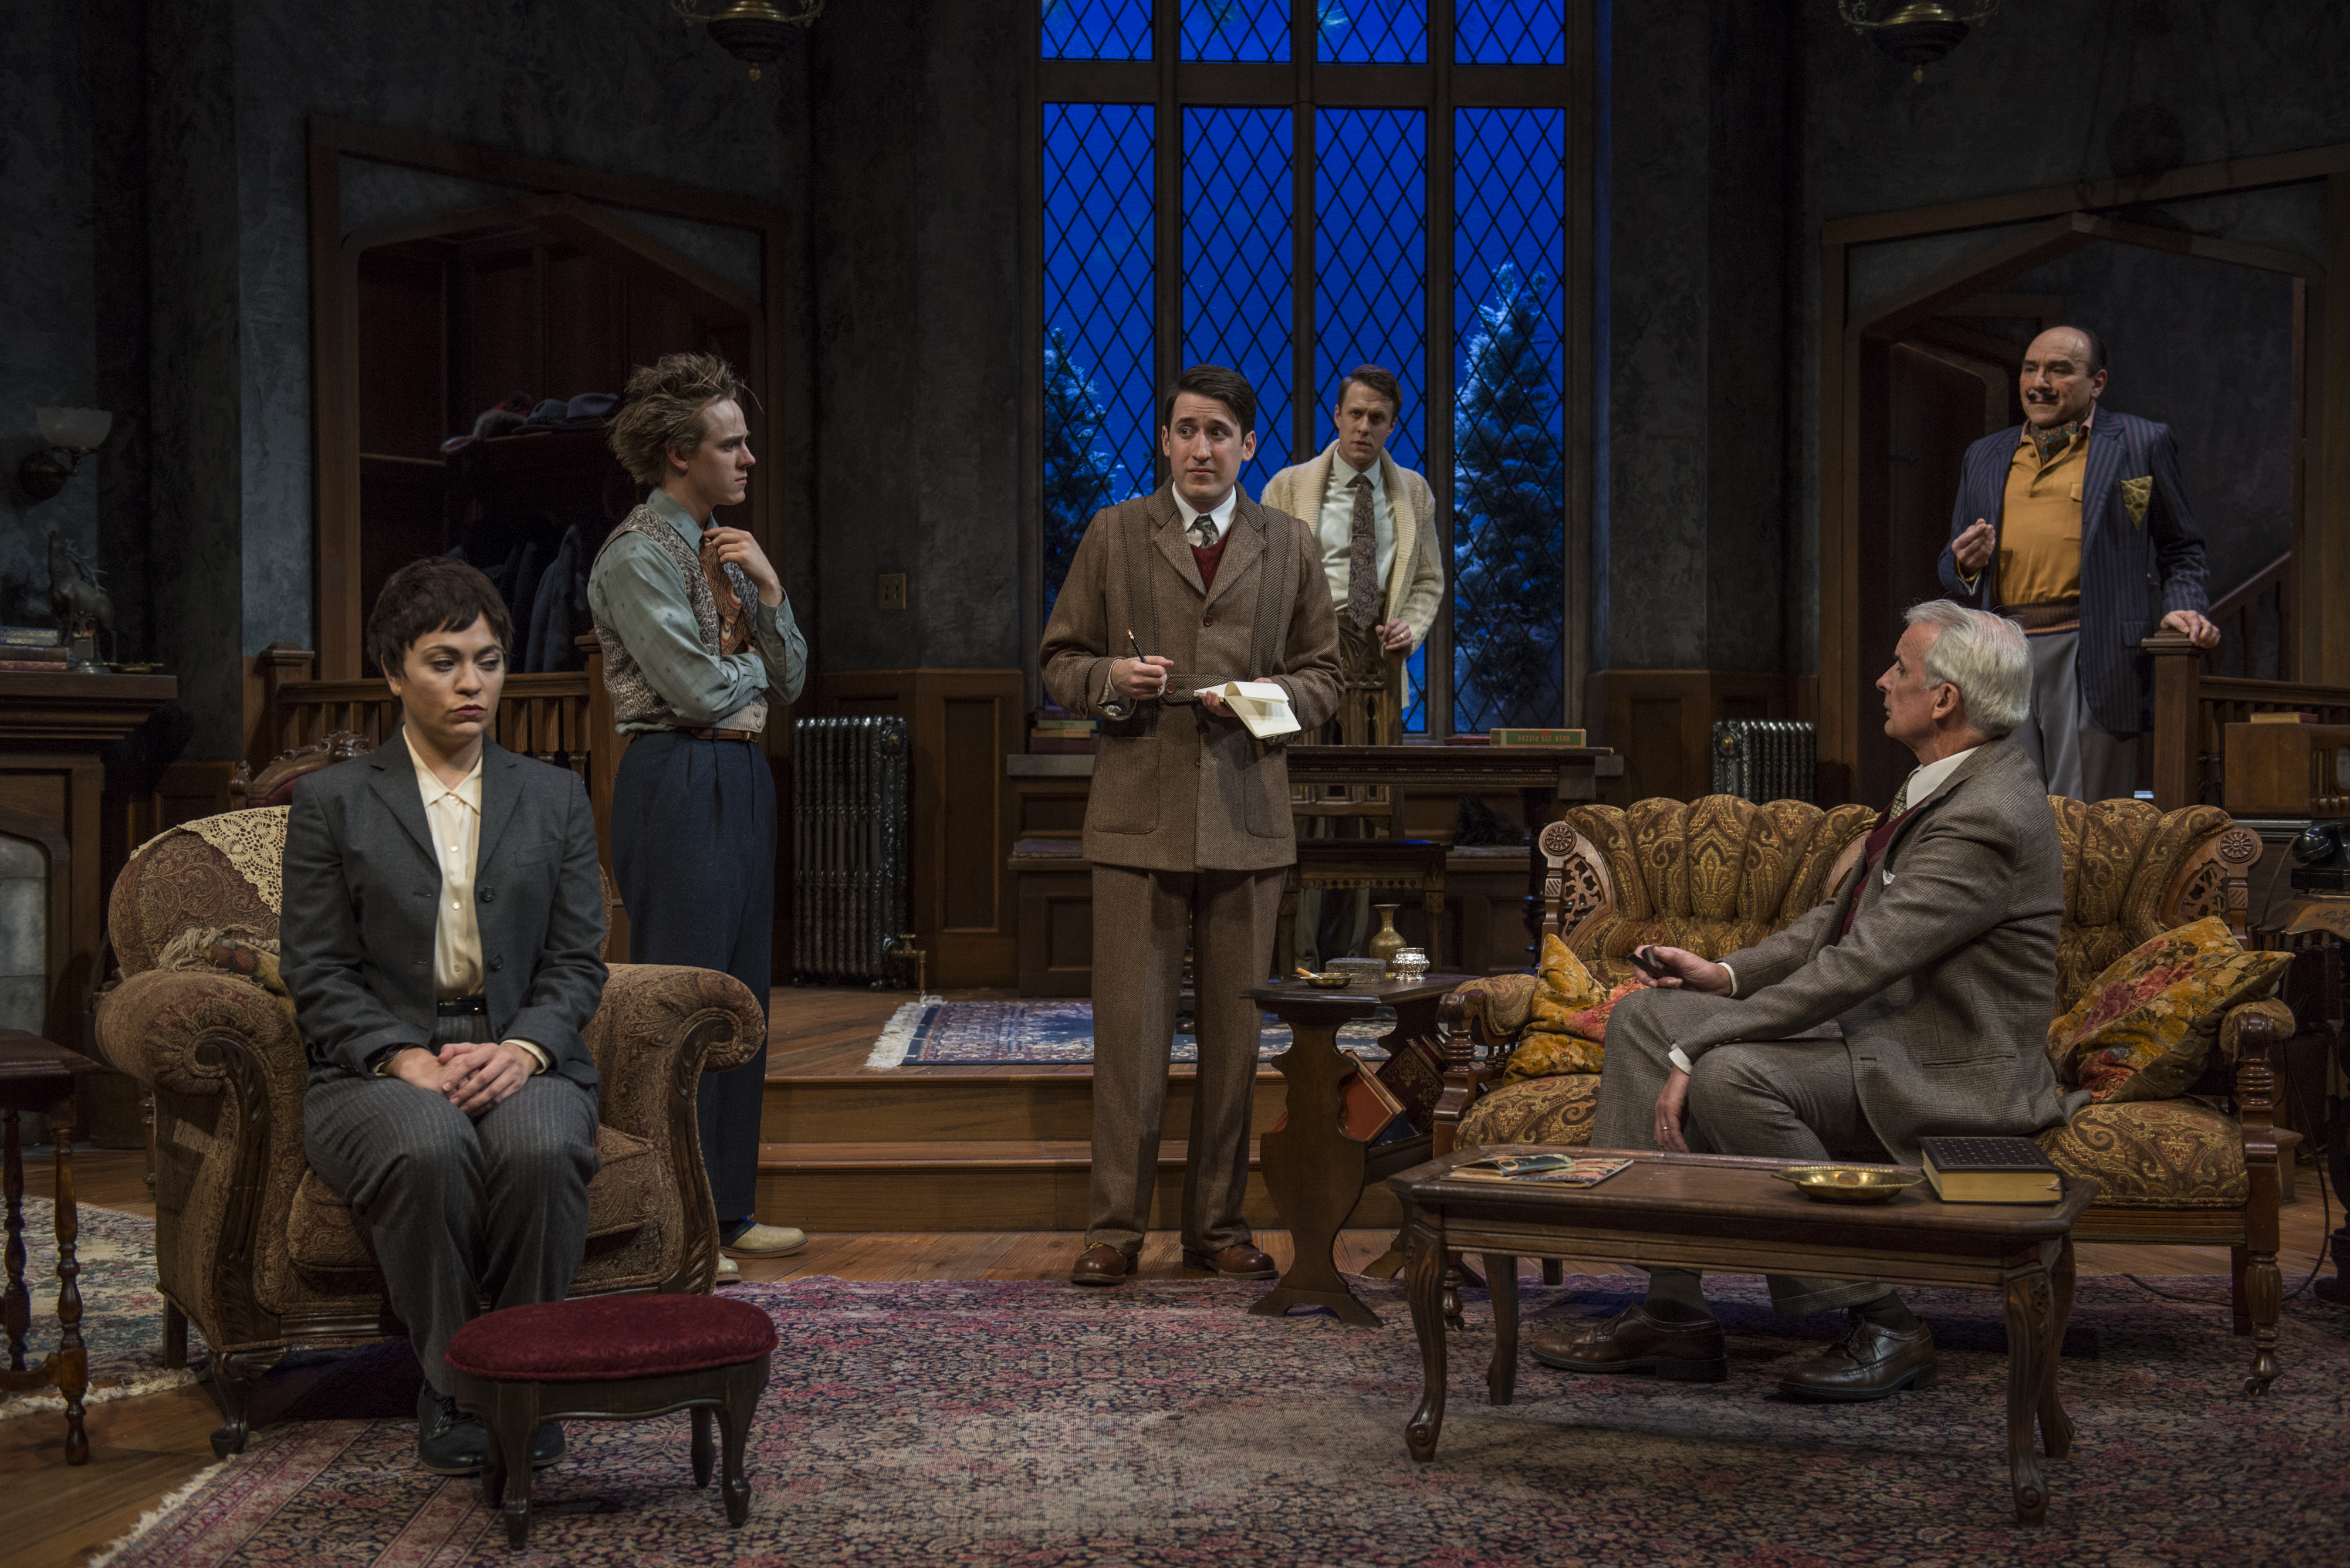 Milwaukee Rep's THE MOUSETRAP Remains A Riveting Murder Mystery 1 REVIEWED BY: MATTHEW PERTA